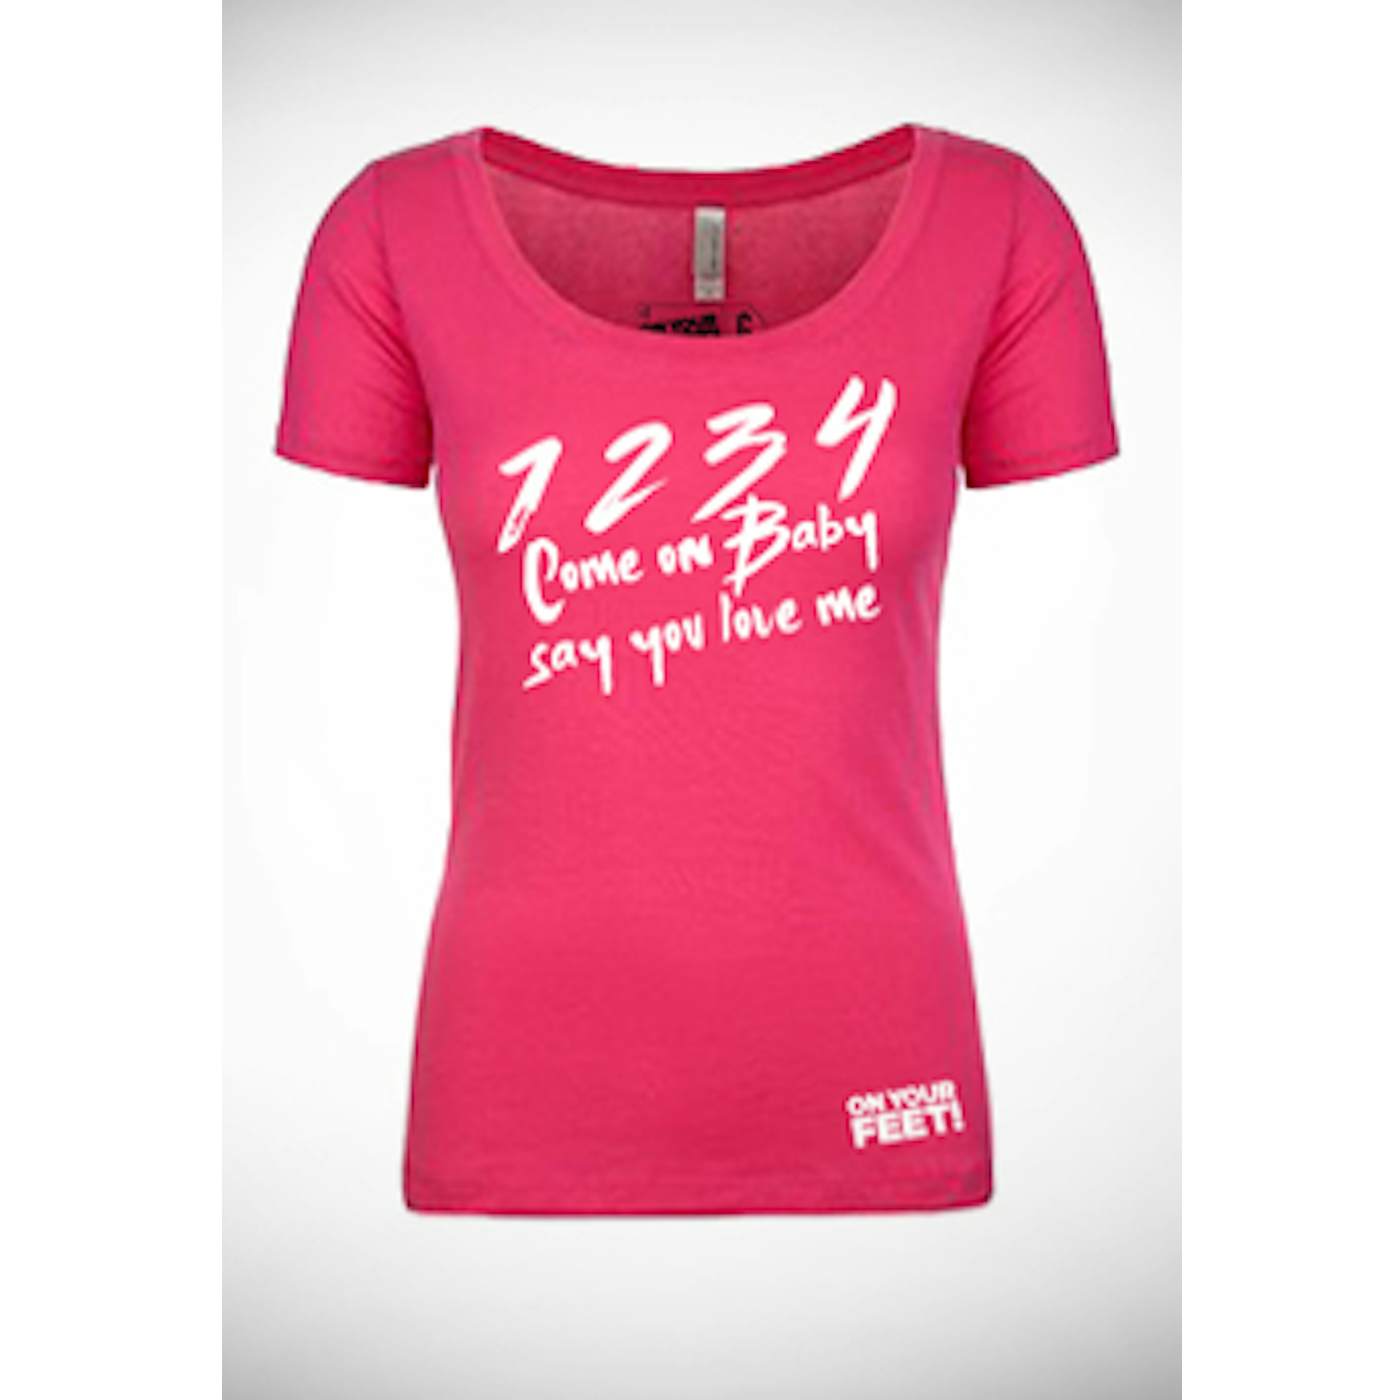 ON YOUR FEET: THE STORY OF EMILIO & GLORIA On Your Feet 1234 Come On Baby Ladies T-Shirt